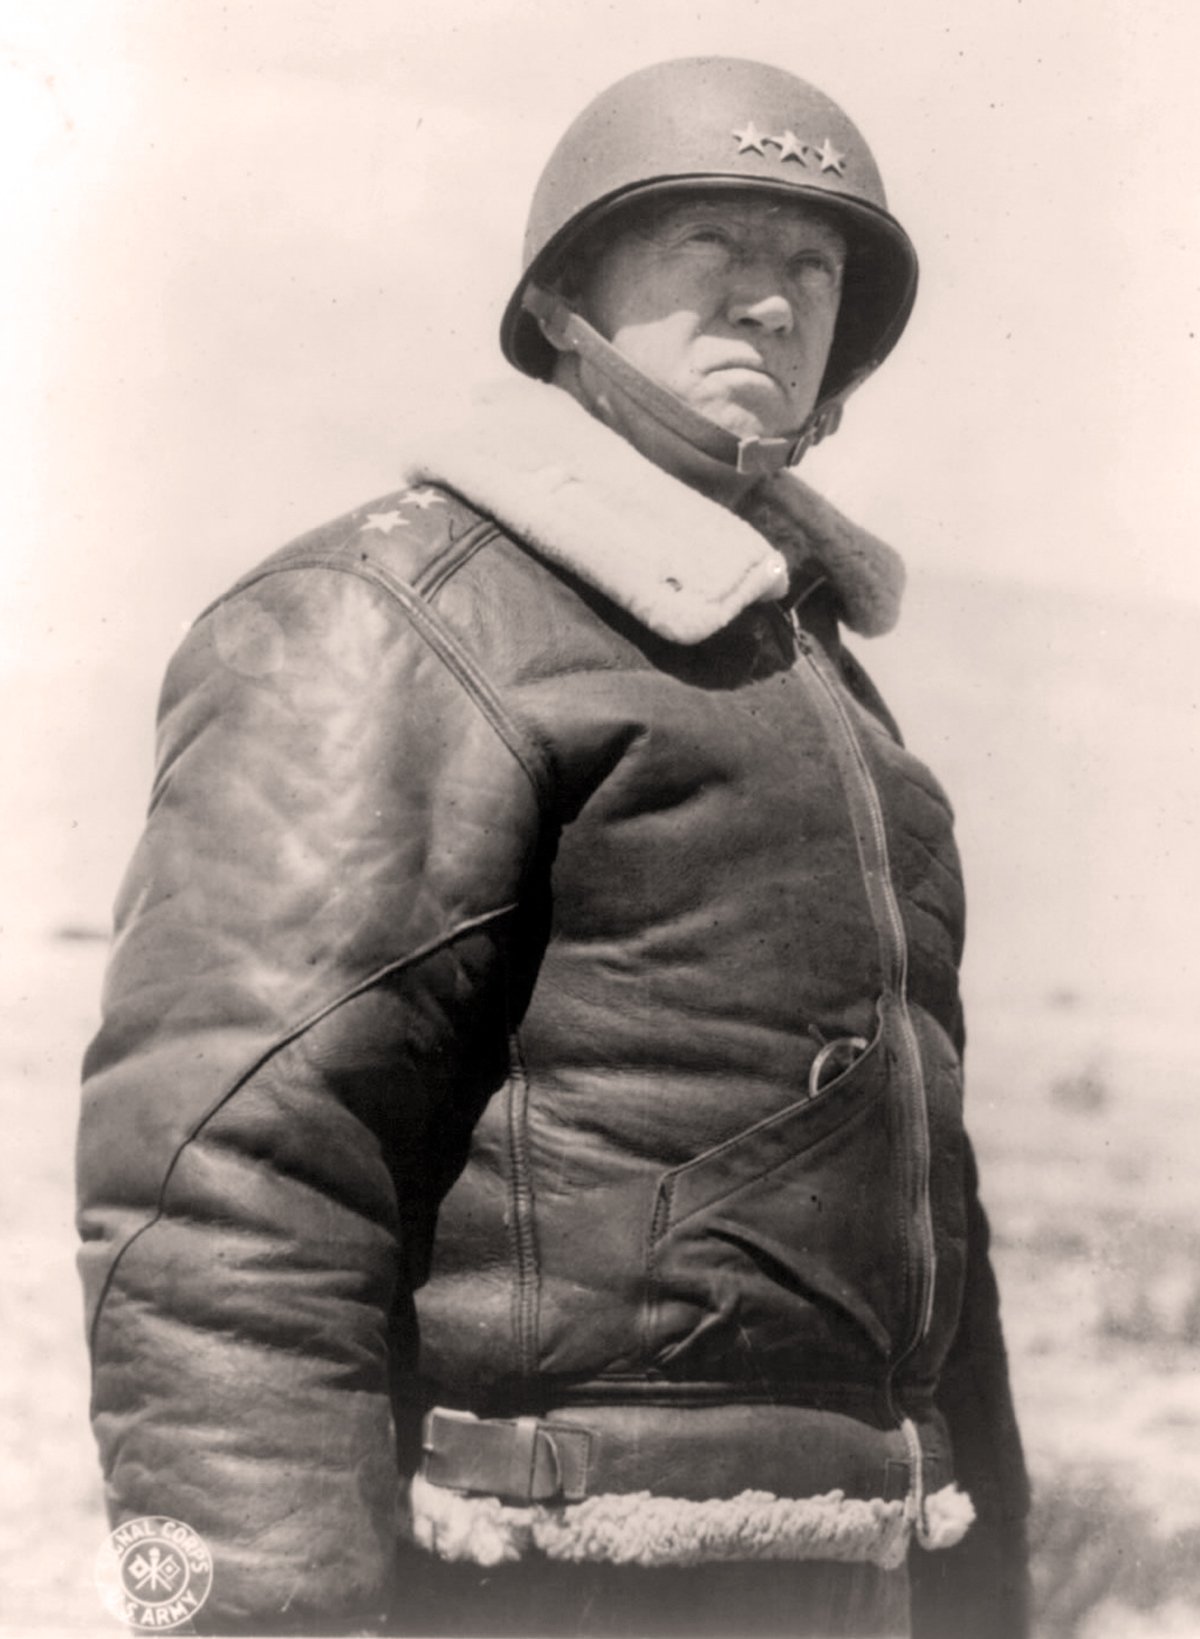 A black and white photo of General George Patton wearing a leather jacket and a helmet. The helmet is a dark color with three white stars. The jacket is a bomber style with a fur collar.